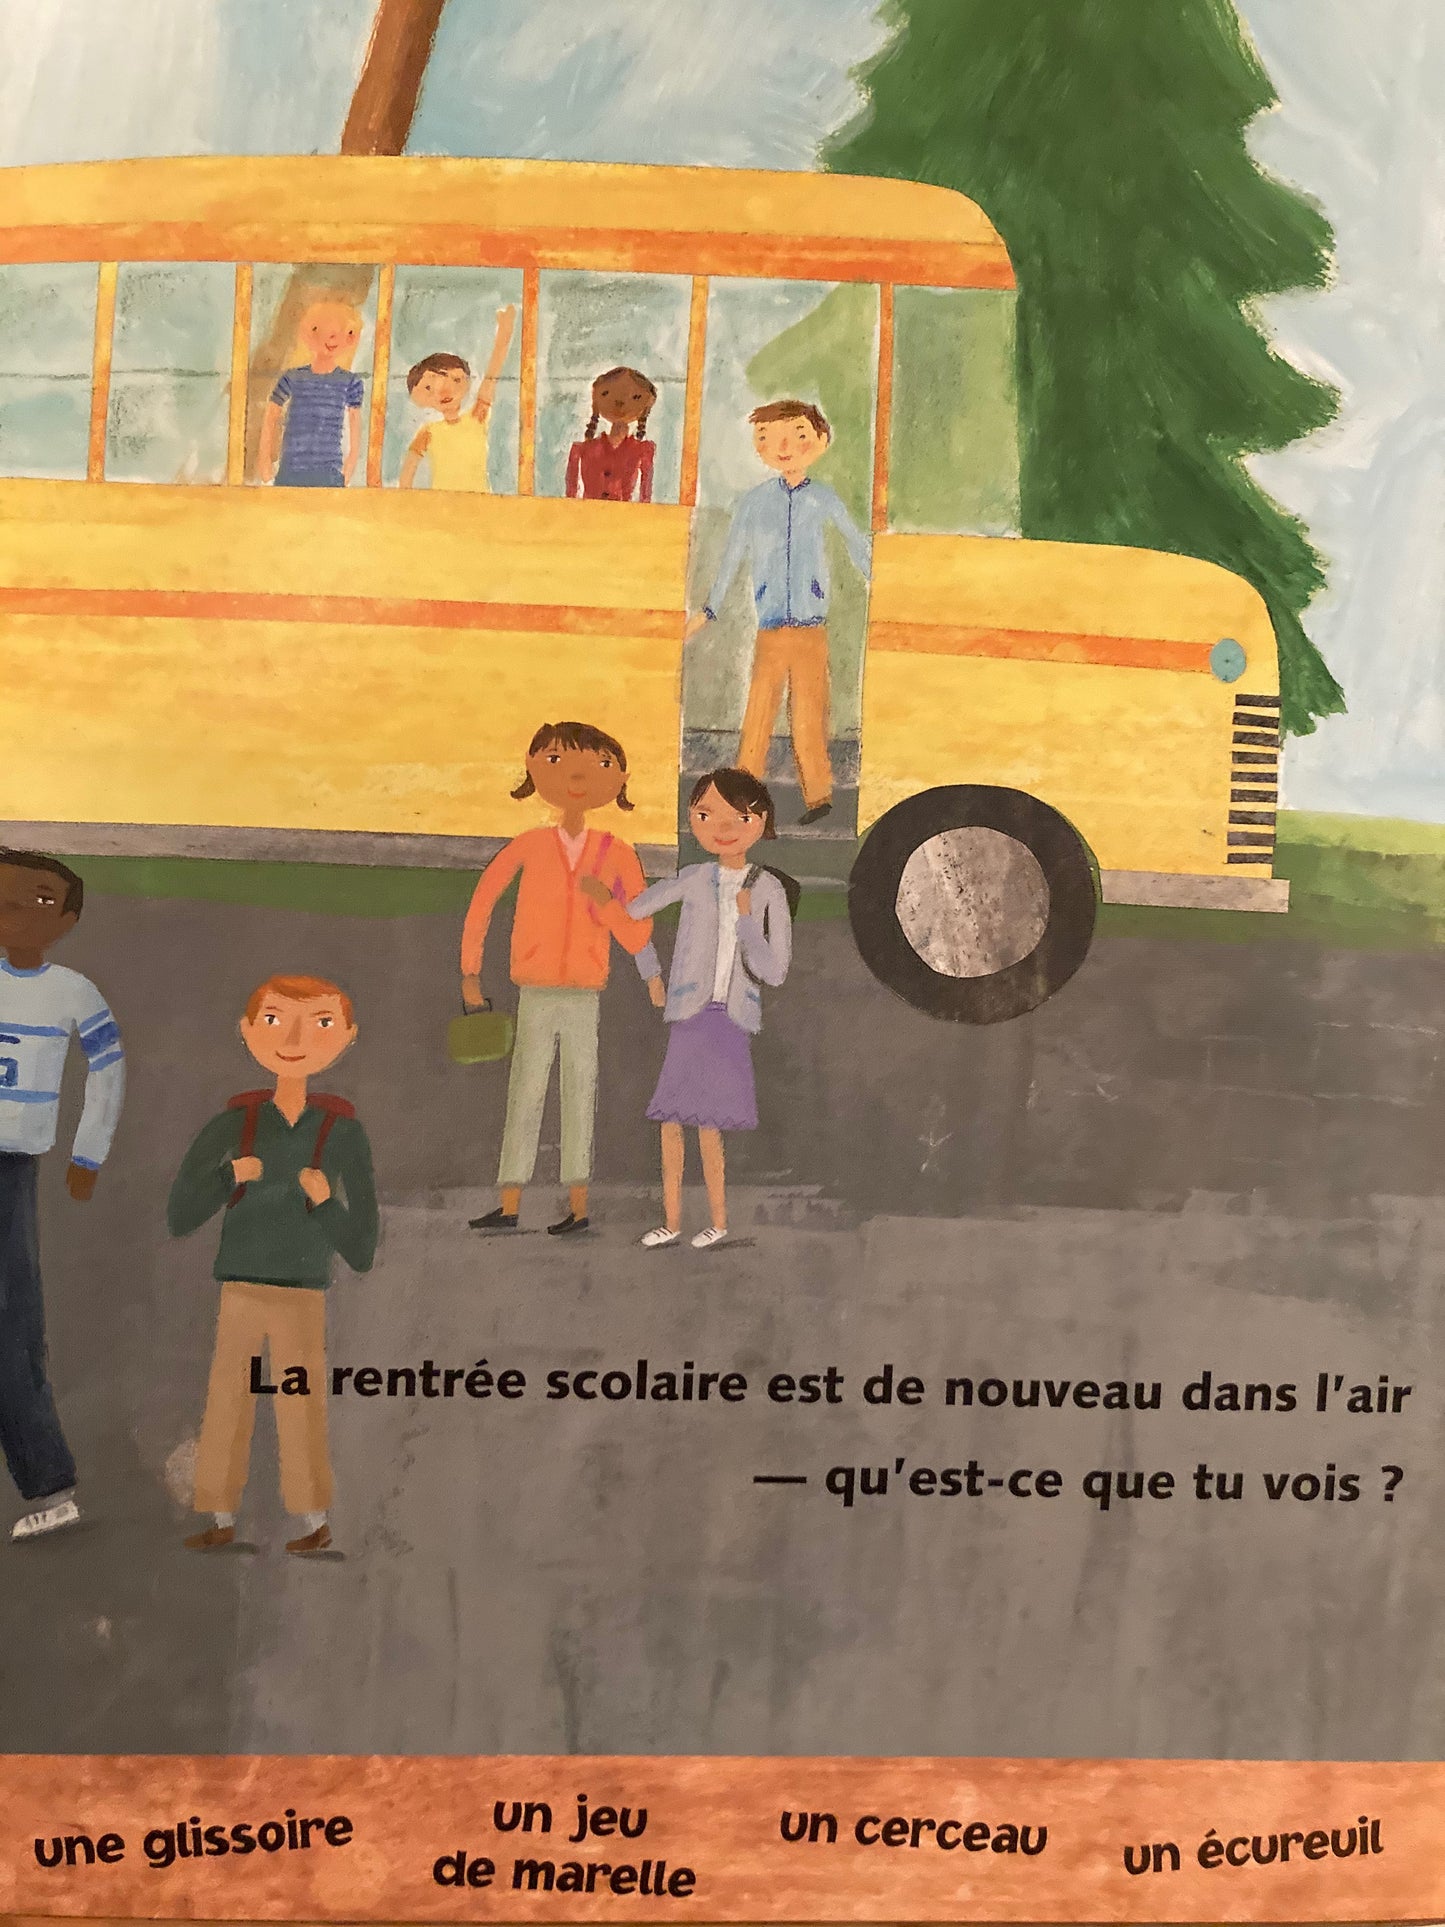 Educational Children's Picture Book - In French, ON Y DANSE LES SAISONS